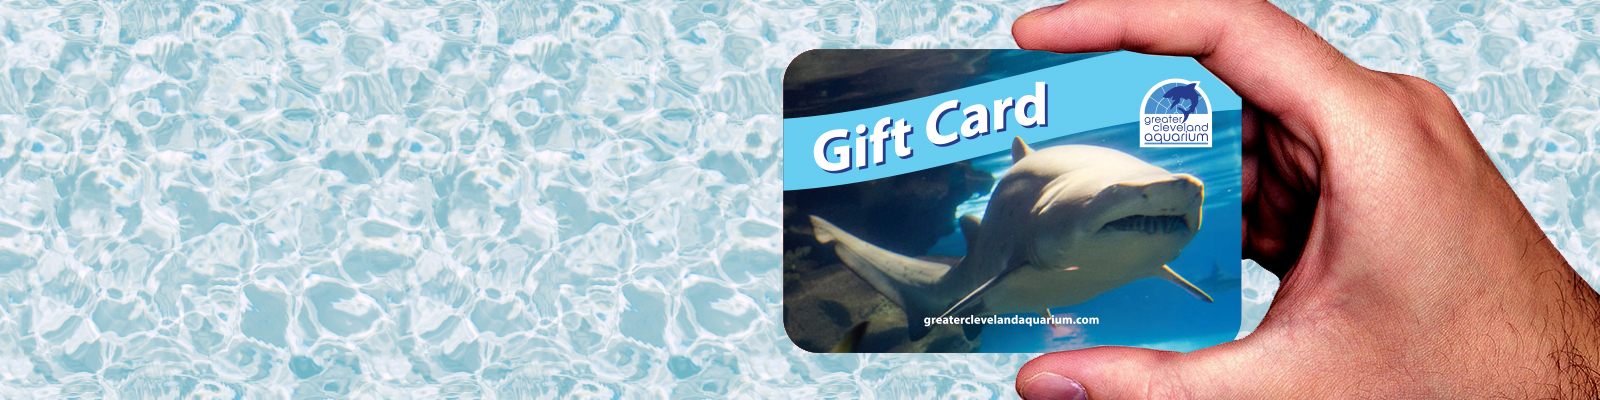 gift card for Sale in Cleveland, OH - OfferUp